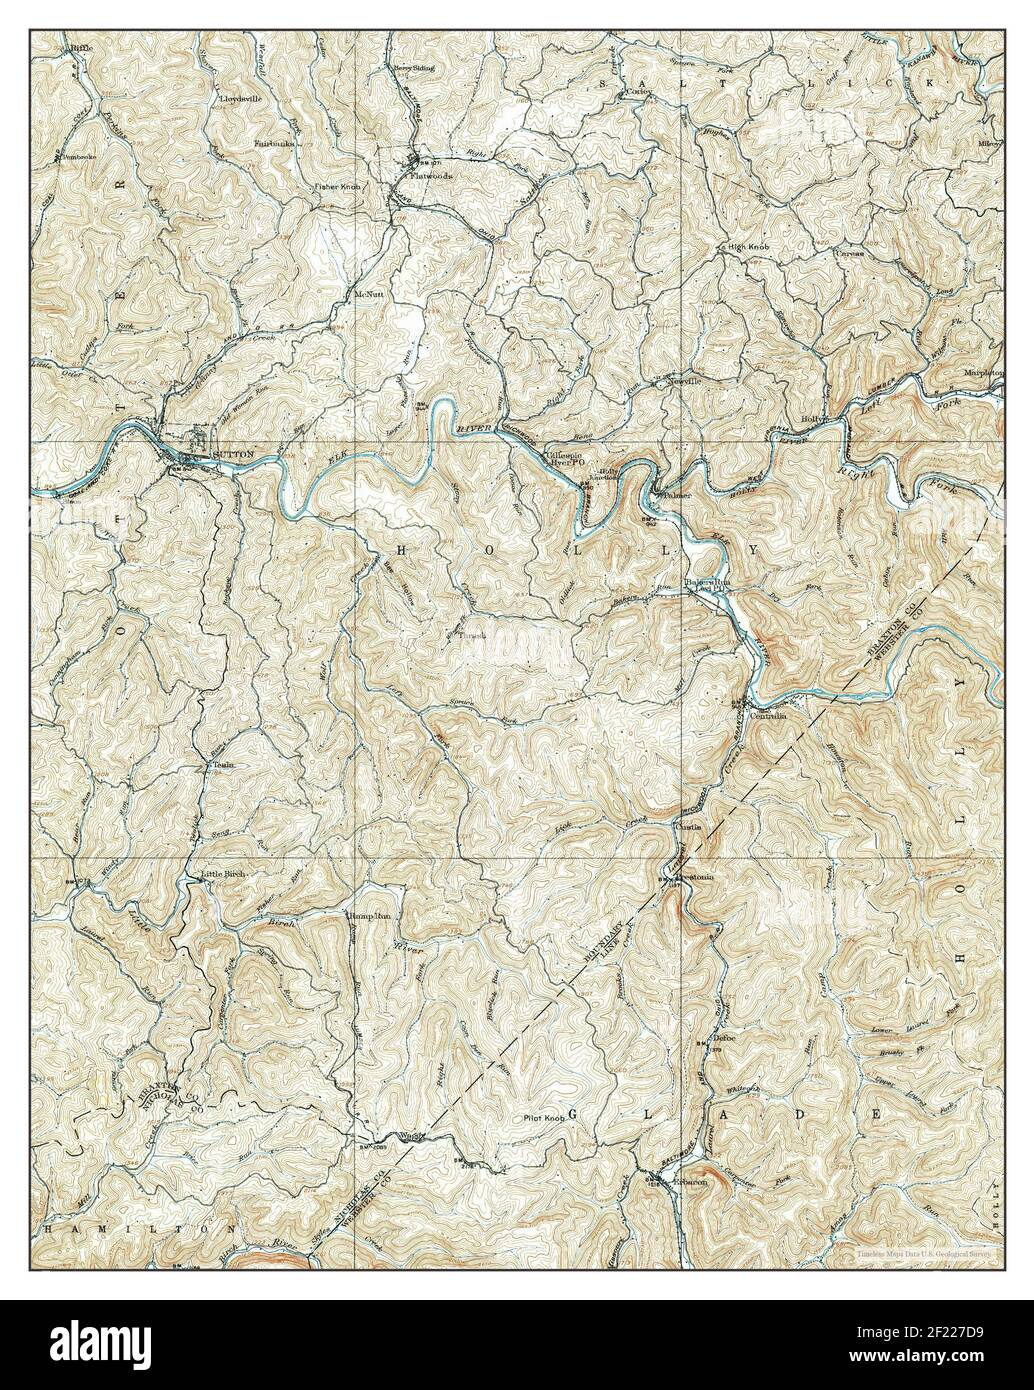 Sutton, West Virginia, map 1908, 1:62500, United States of America by Timeless Maps, data U.S. Geological Survey Stock Photo